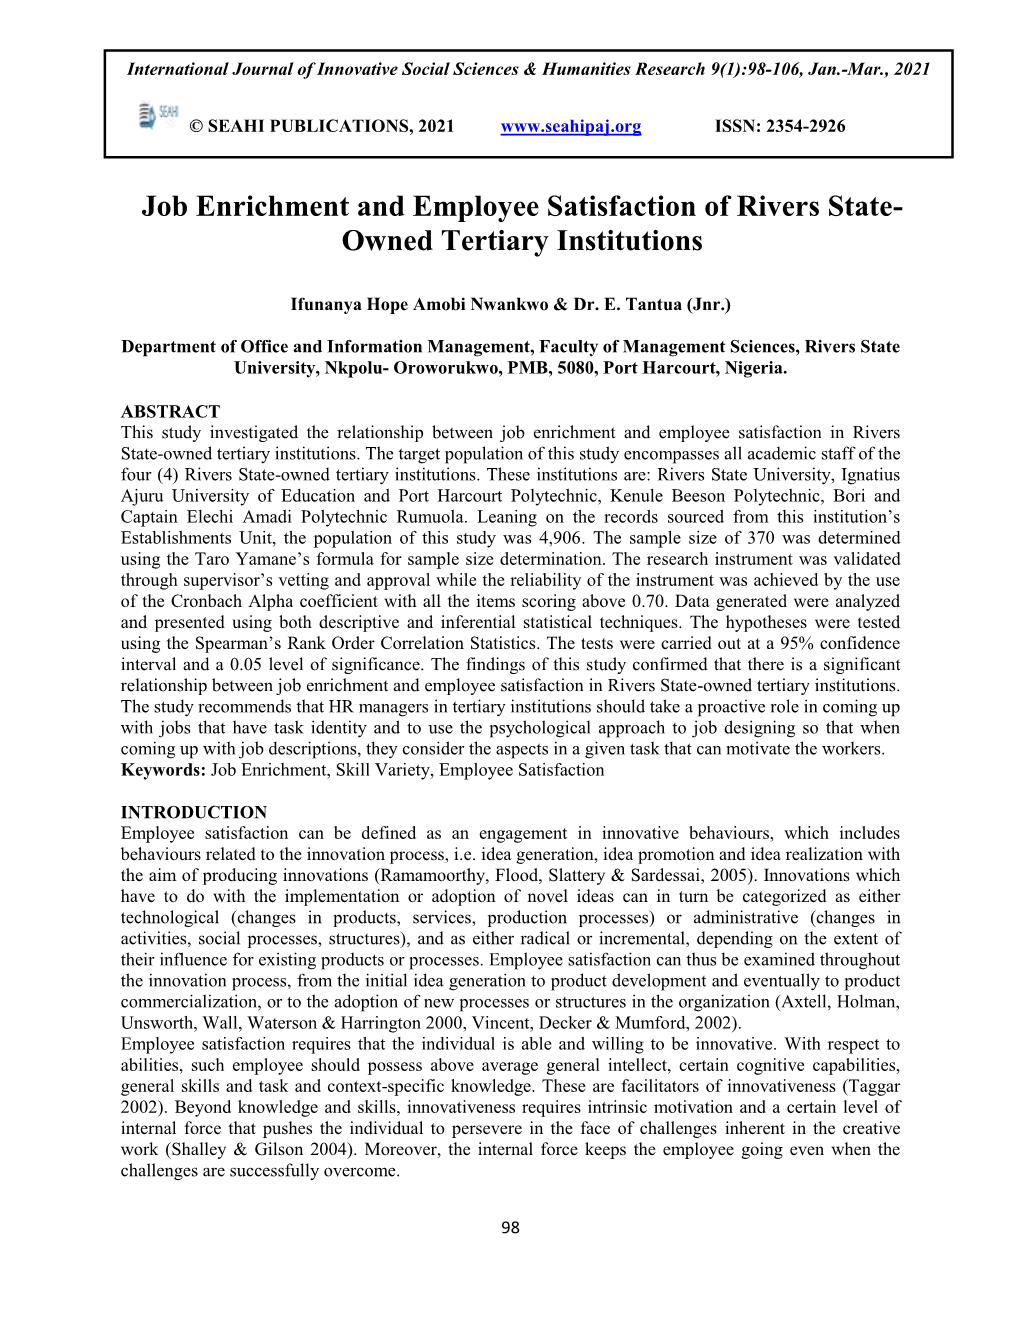 Job Enrichment and Employee Satisfaction of Rivers State- Owned Tertiary Institutions